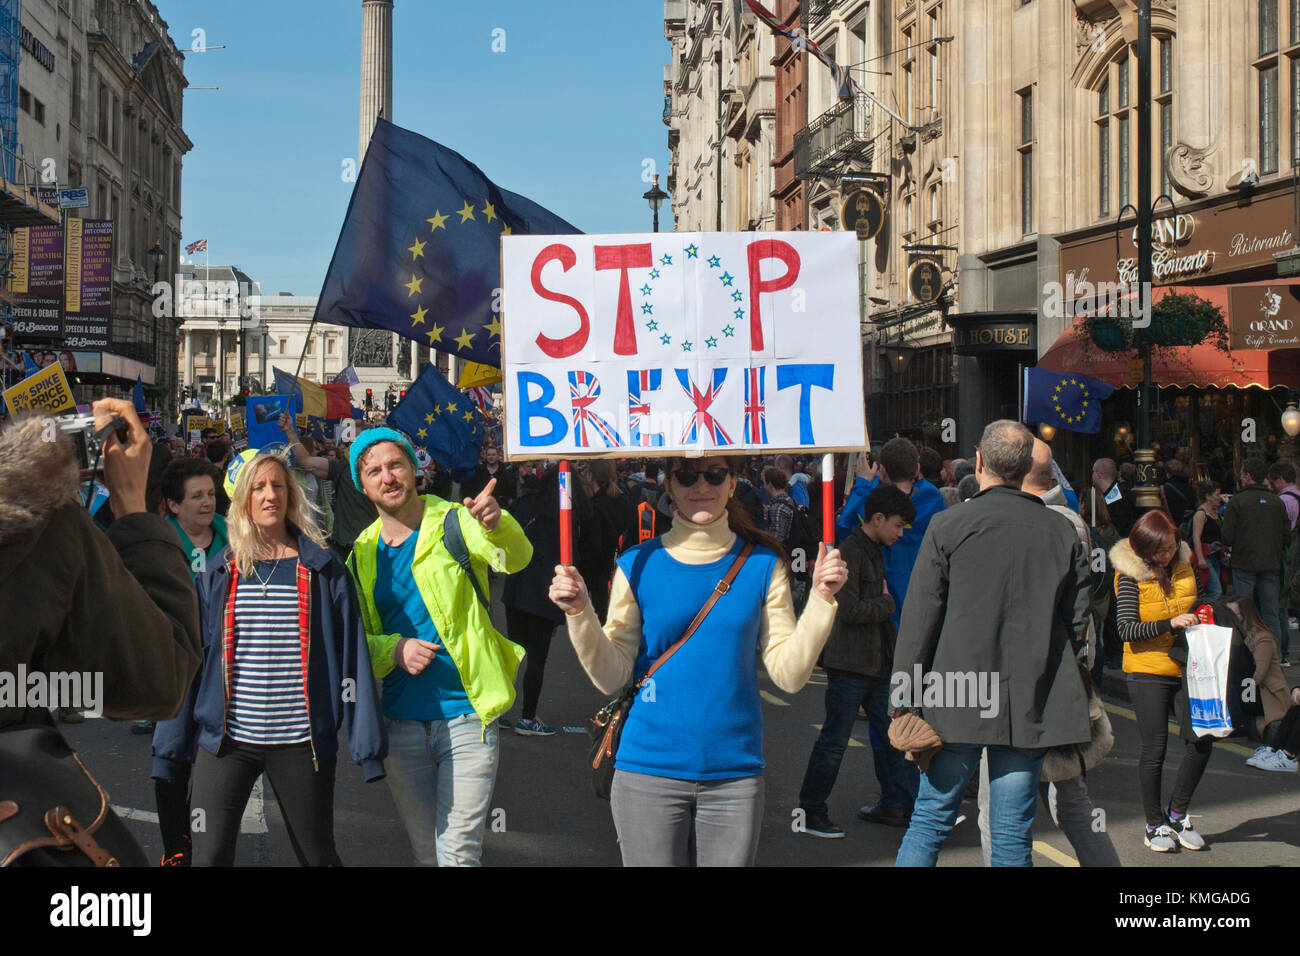 Anti Brexit demonstration. Young woman holding colourful banner with 'Stop Brexit', man pointing at banner and EU flag behind Stock Photo